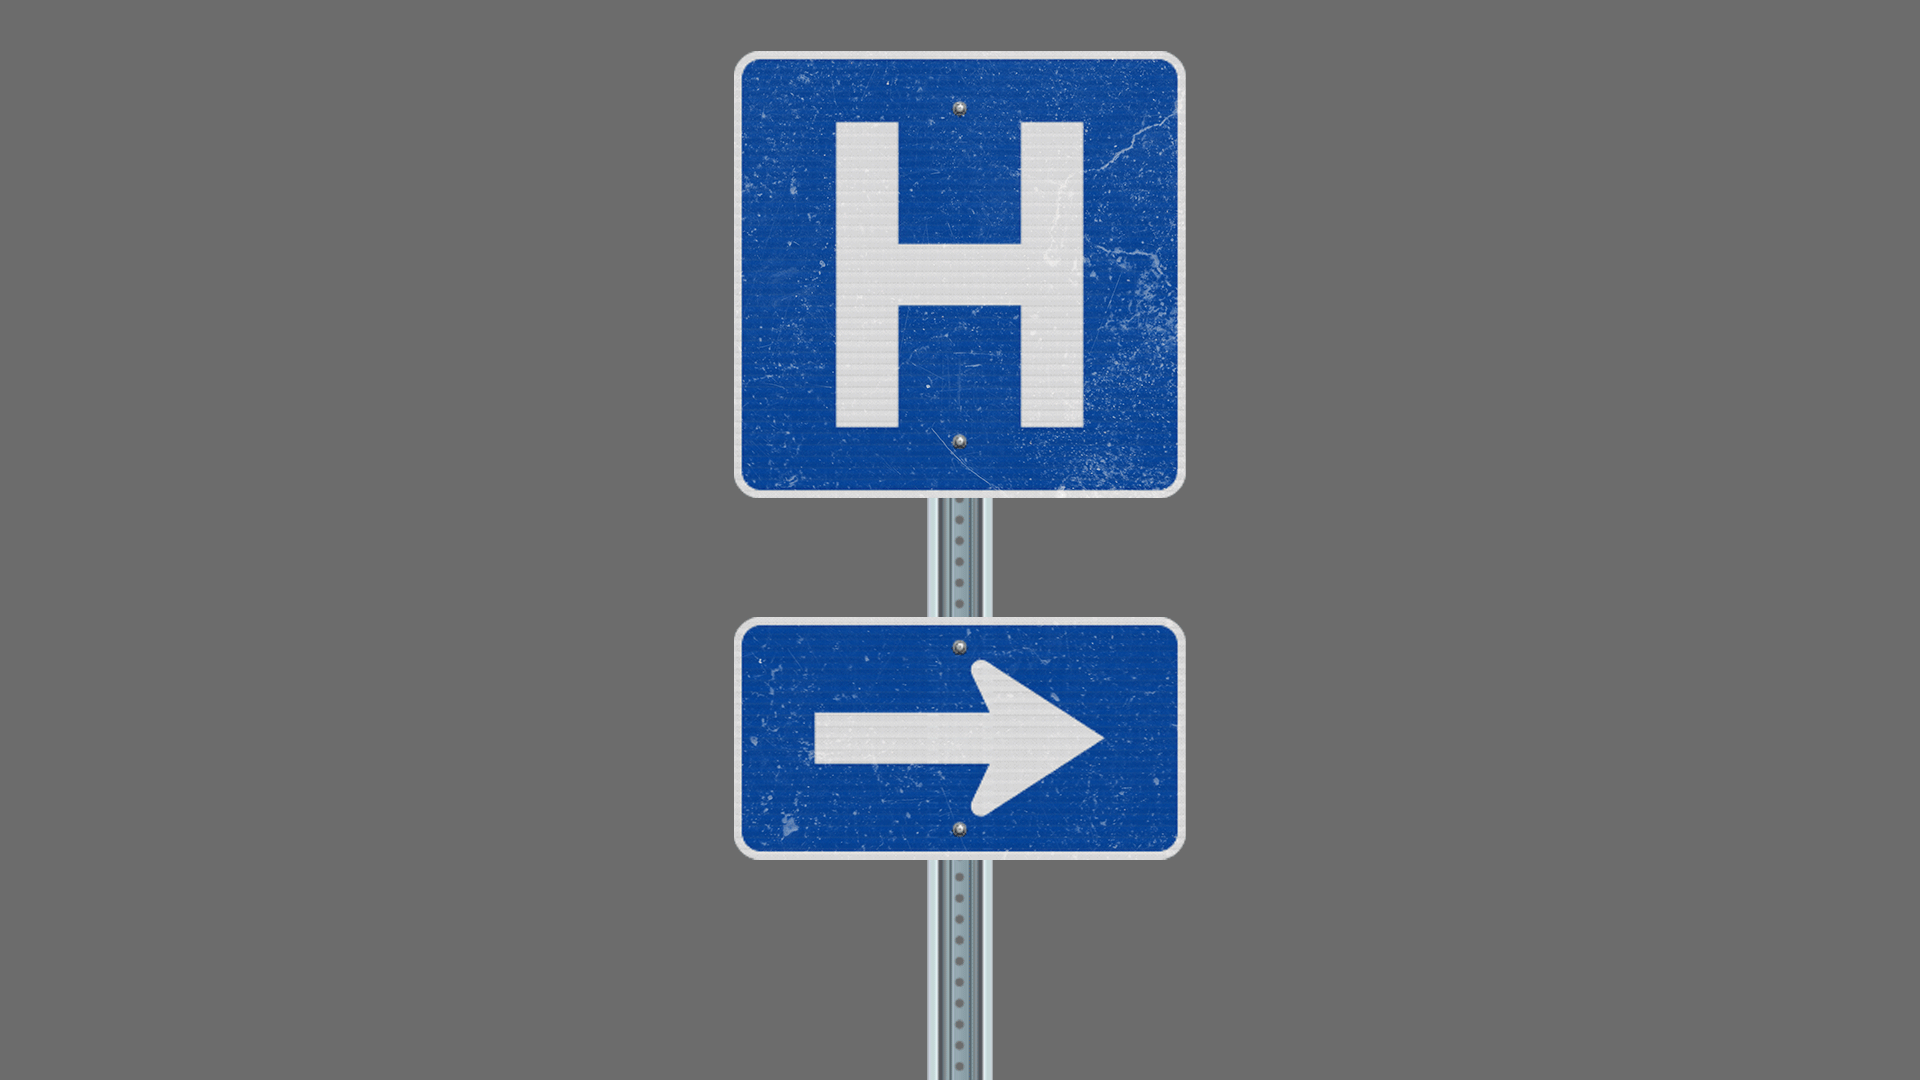 Illustration of a distressed hospital sign with the arrow portion detaching and swinging downwards